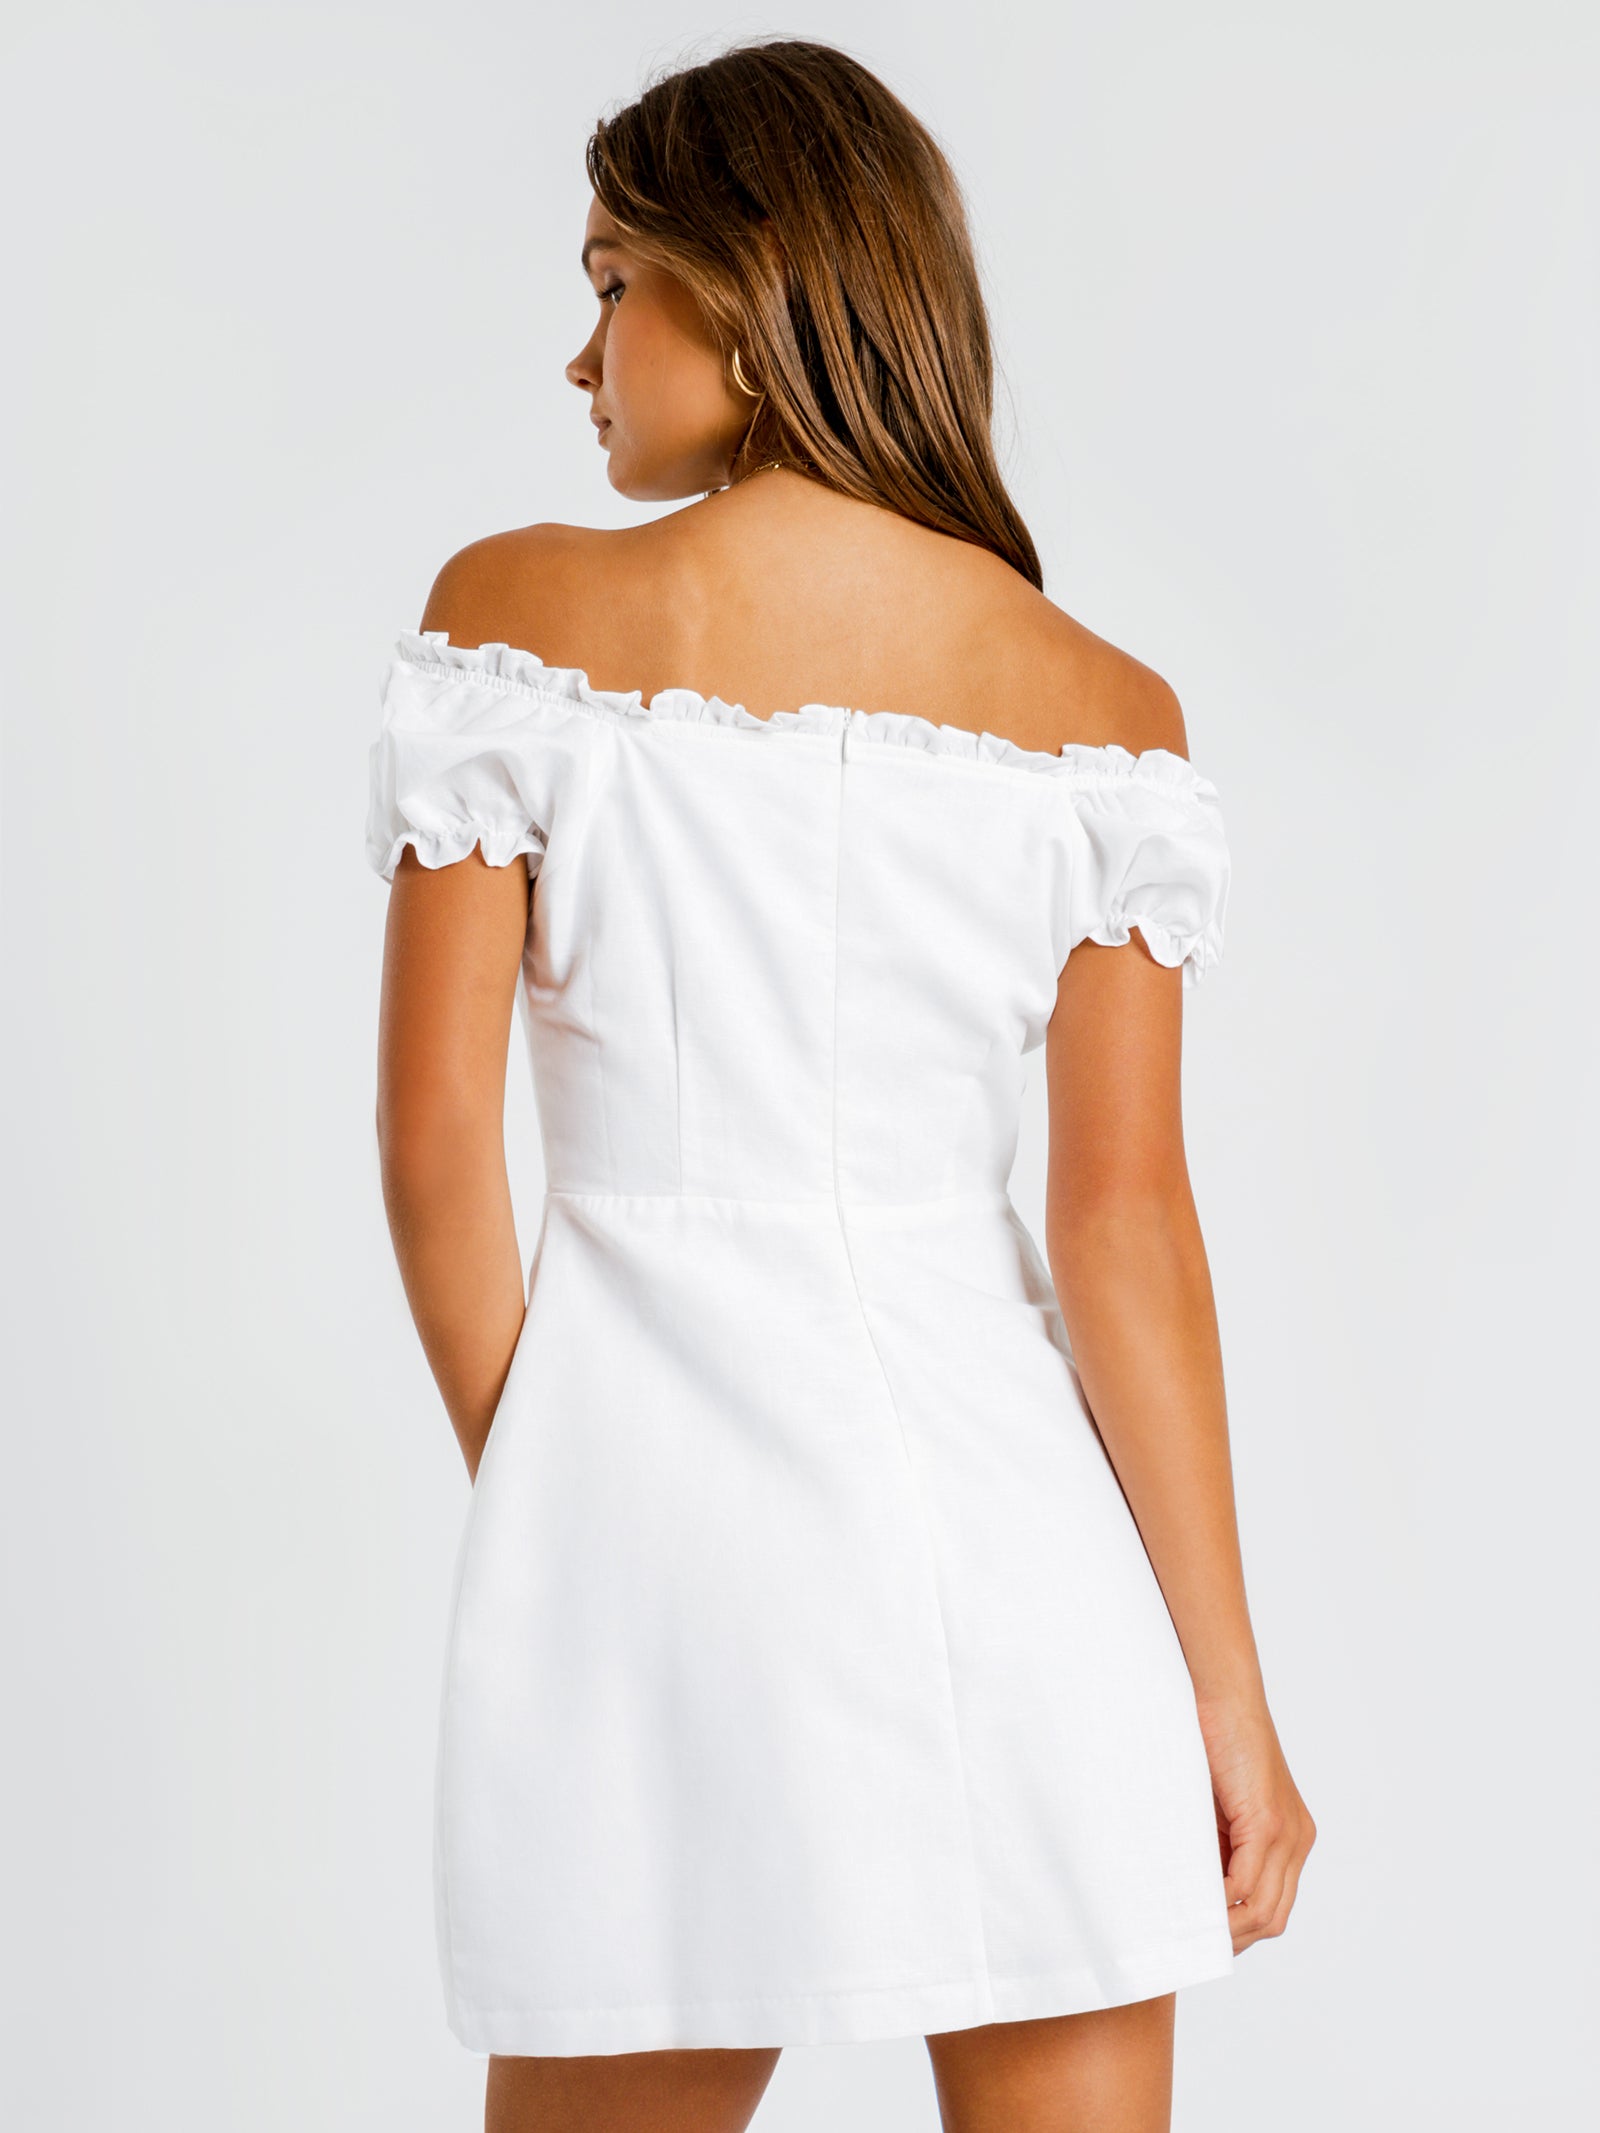 Thelma Linen Dress in White